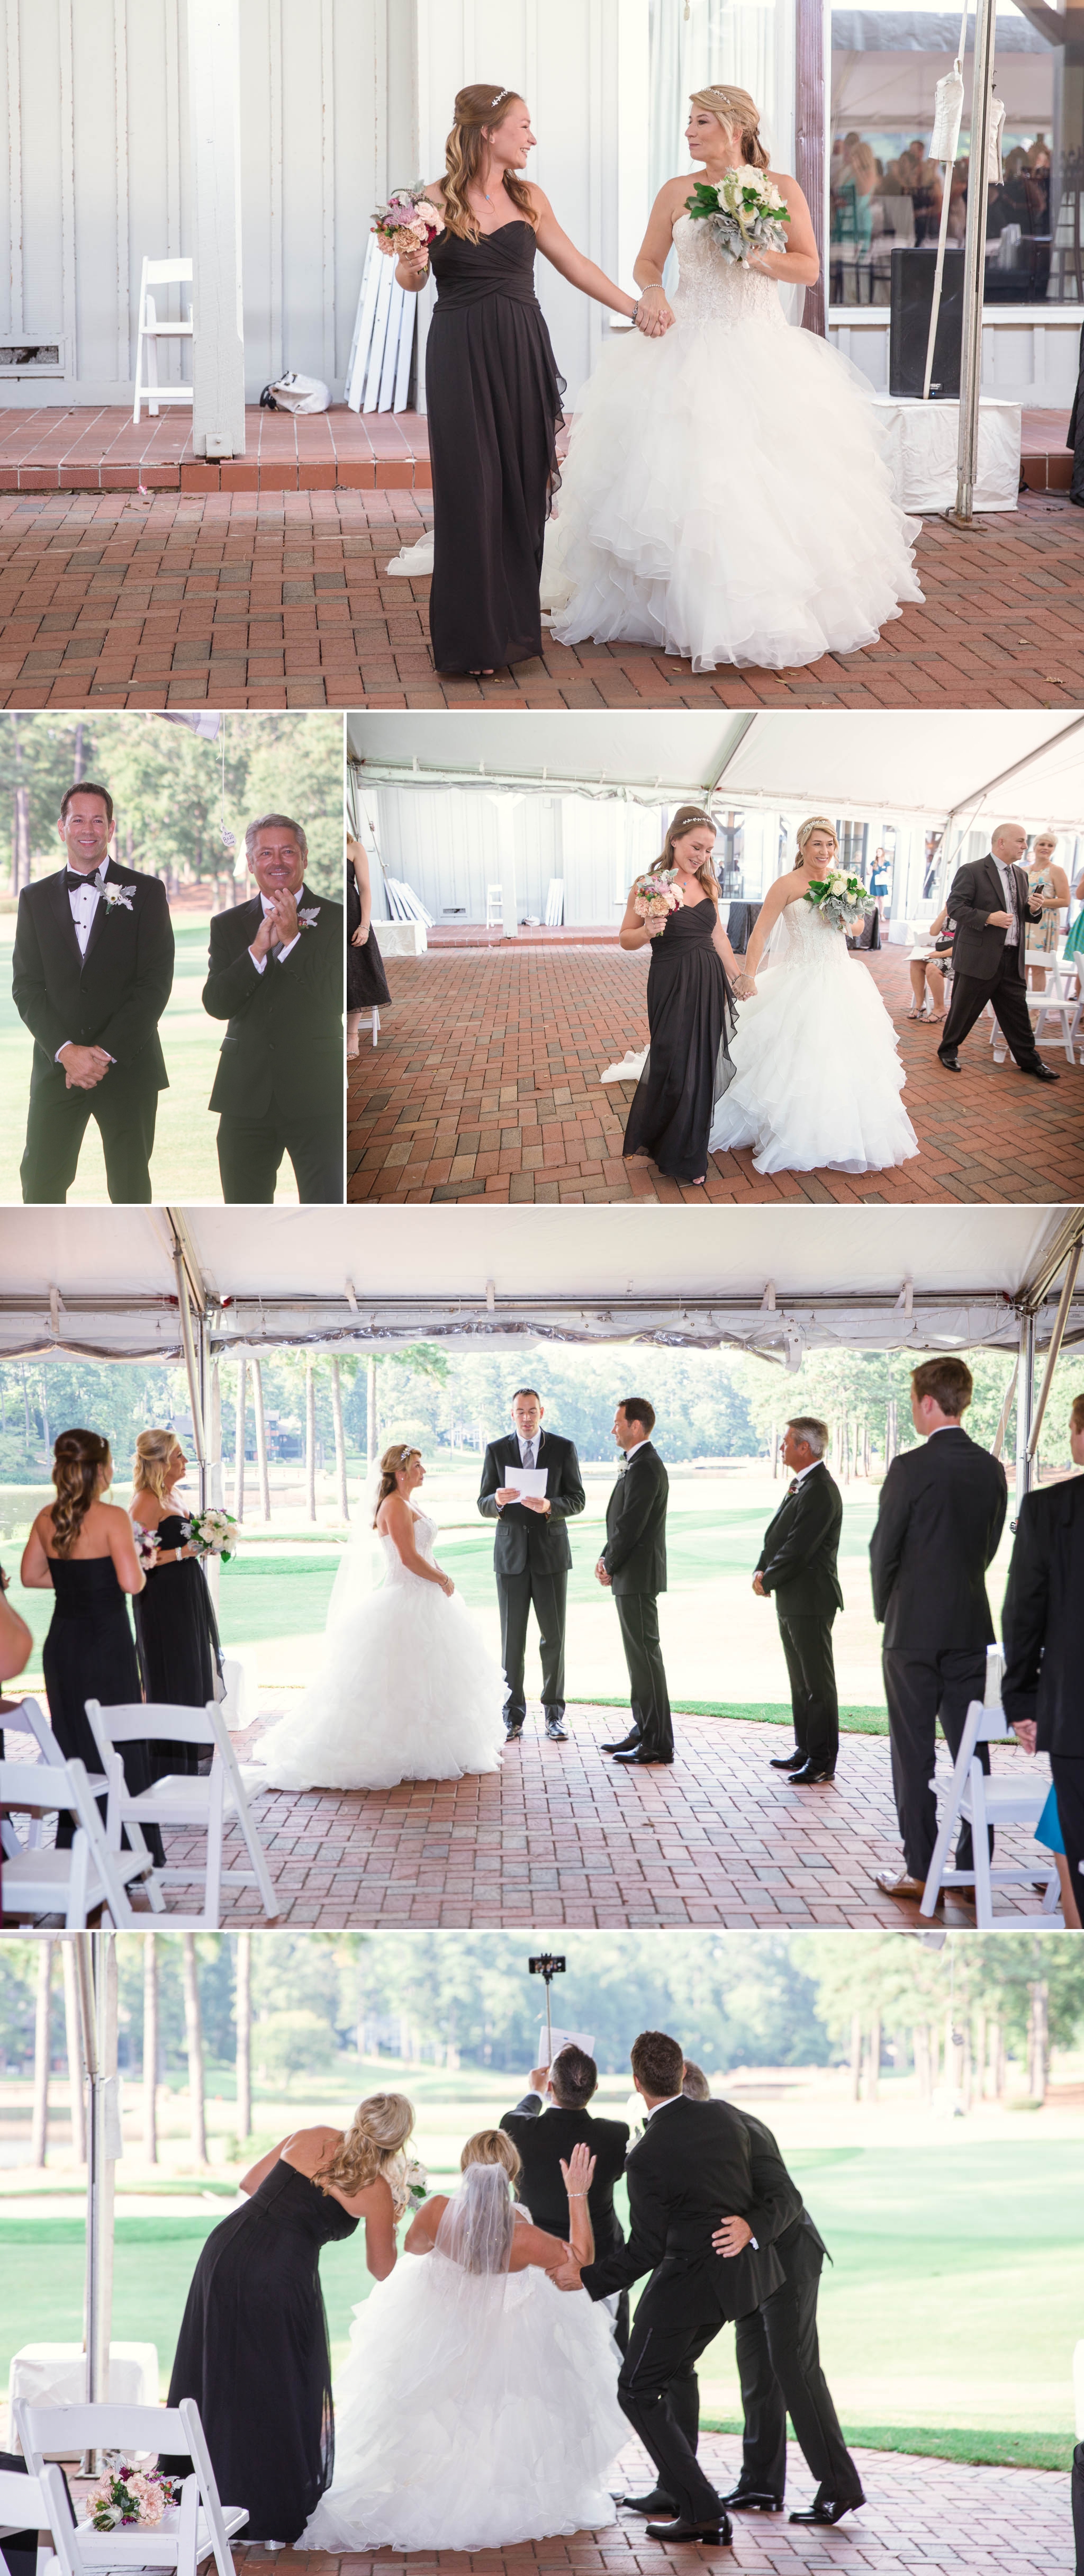 Ceremony - Dona + Doug - MacGregor Downs Country Club in Cary, NC - Raleigh Wedding Photographer